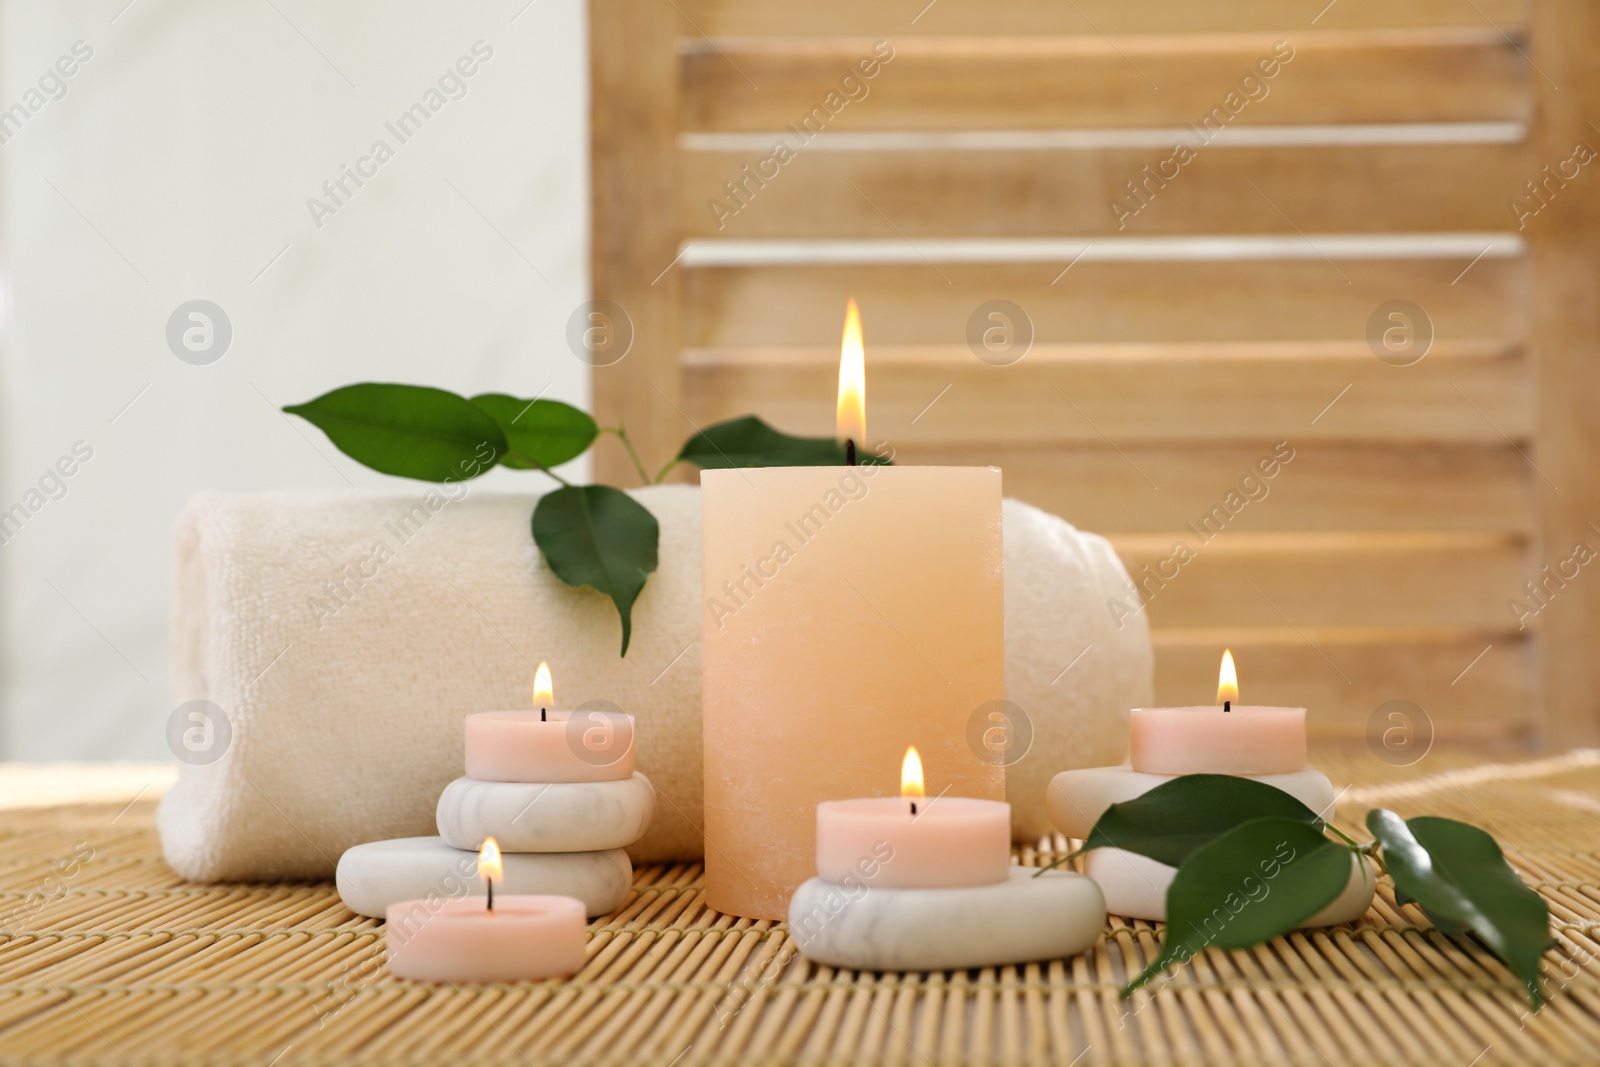 Photo of Composition of spa stones, towel and burning candles on bamboo mat